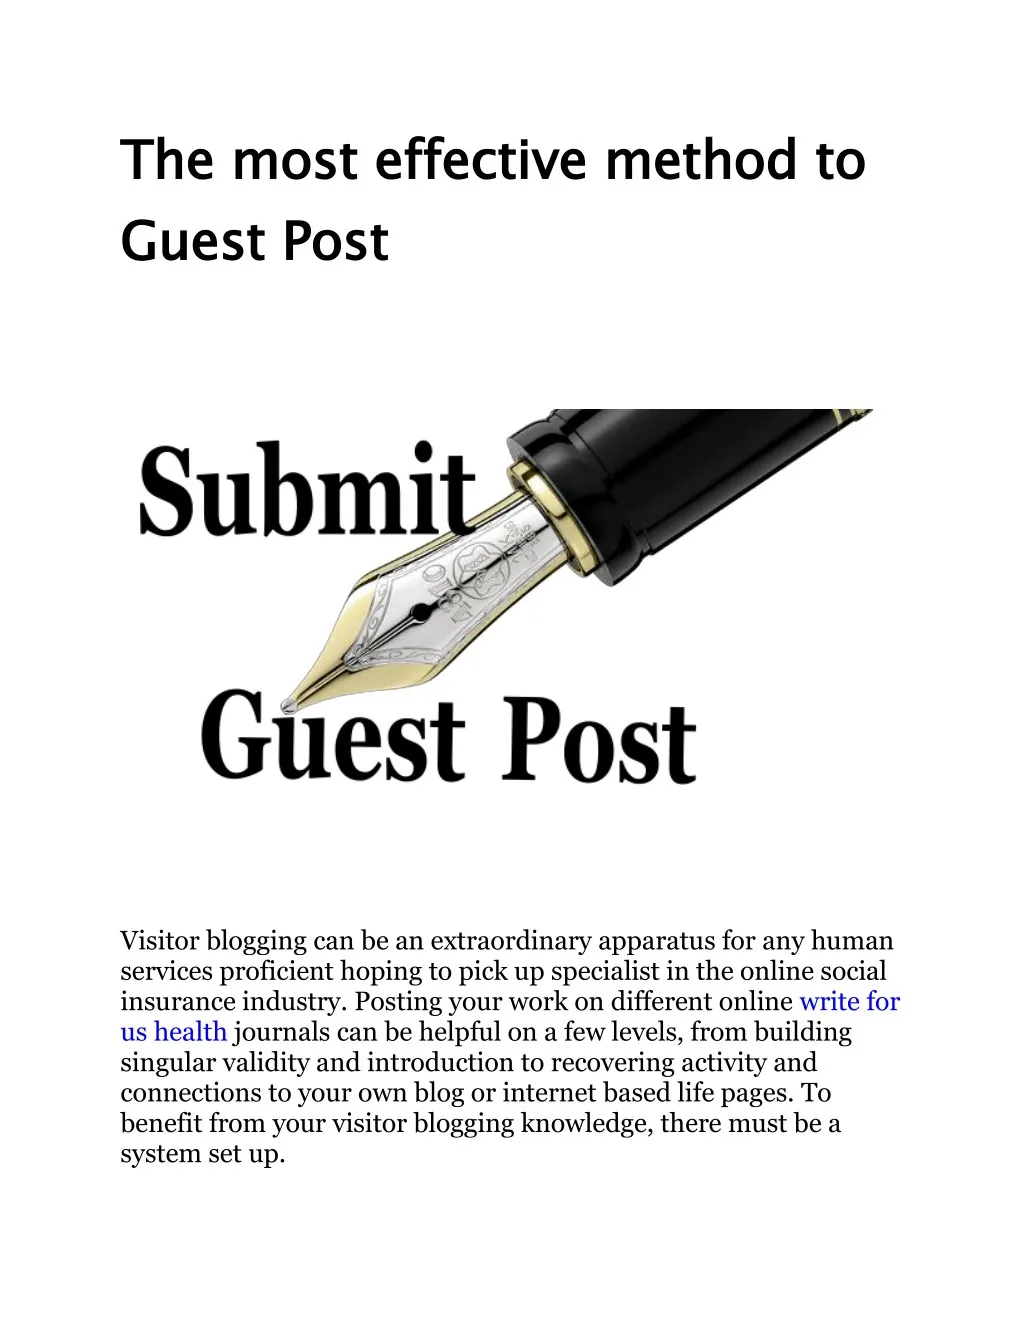 the most effective method to guest